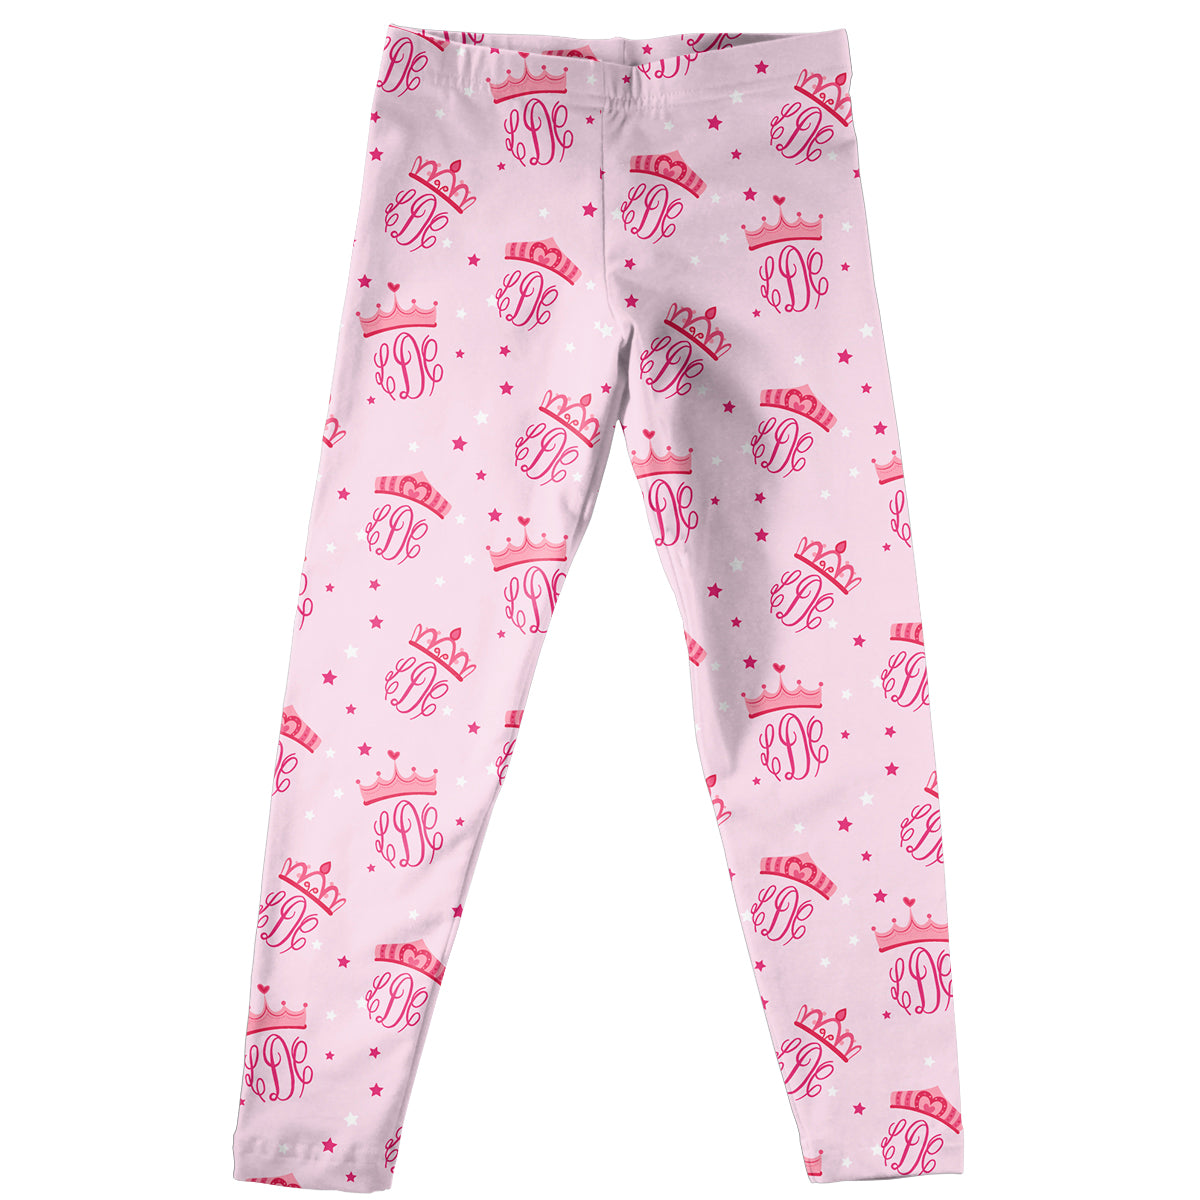 Personalized Monogram and Crows Print Pink Leggings - Wimziy&Co.